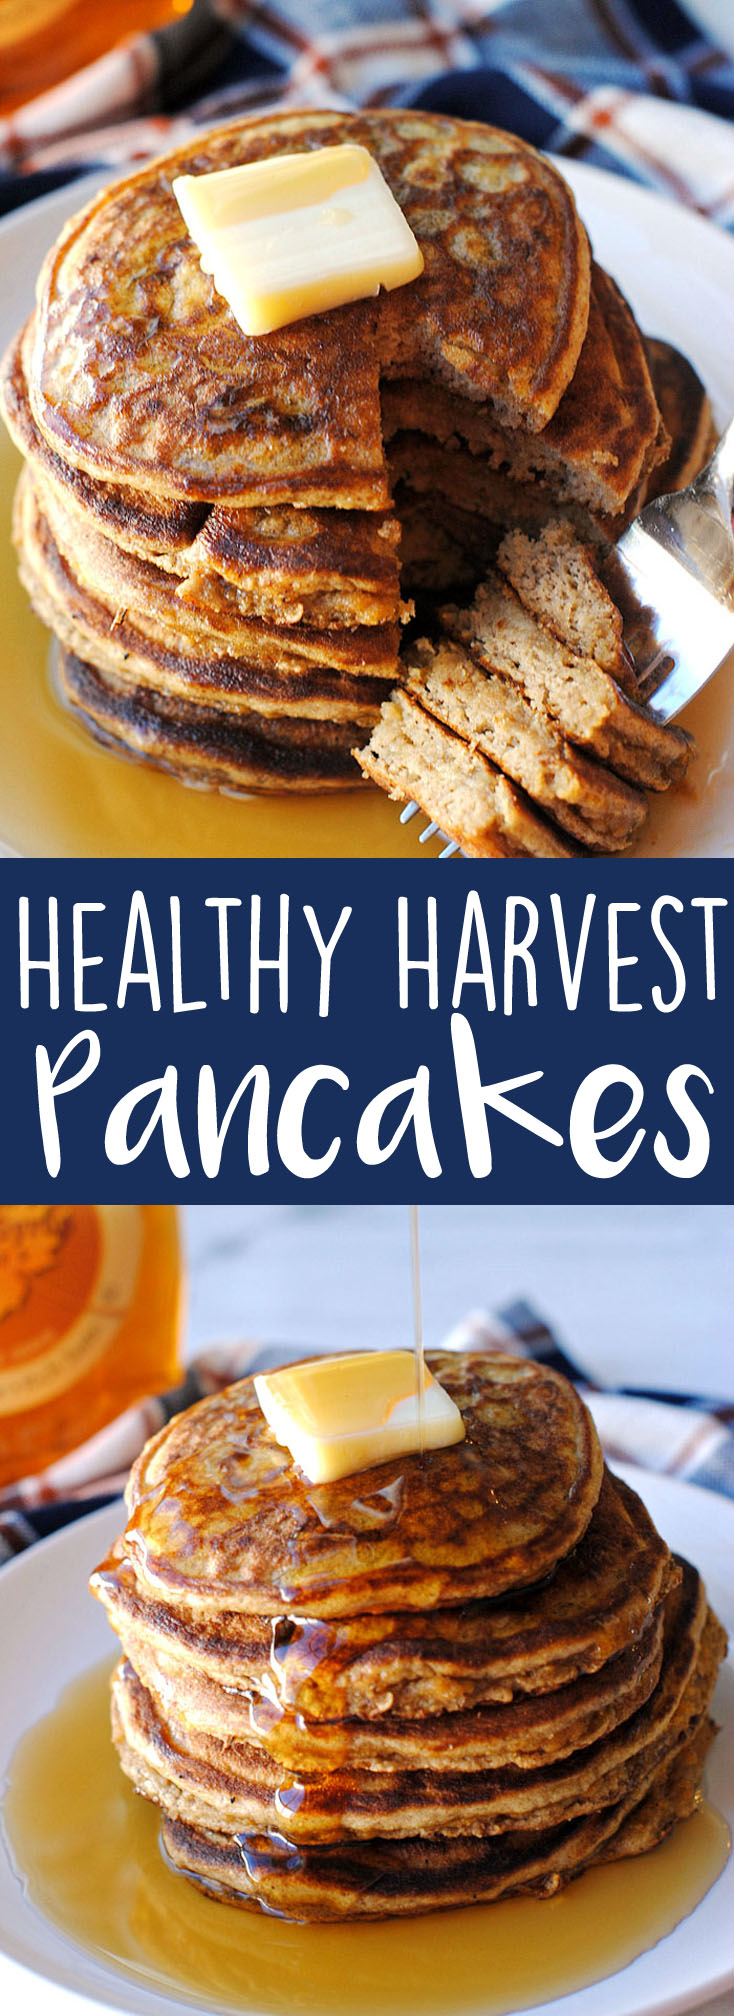 Healthy Harvest Pancakes - made with only eggs, banana and a little almond flour! | Eat Yourself Skinny